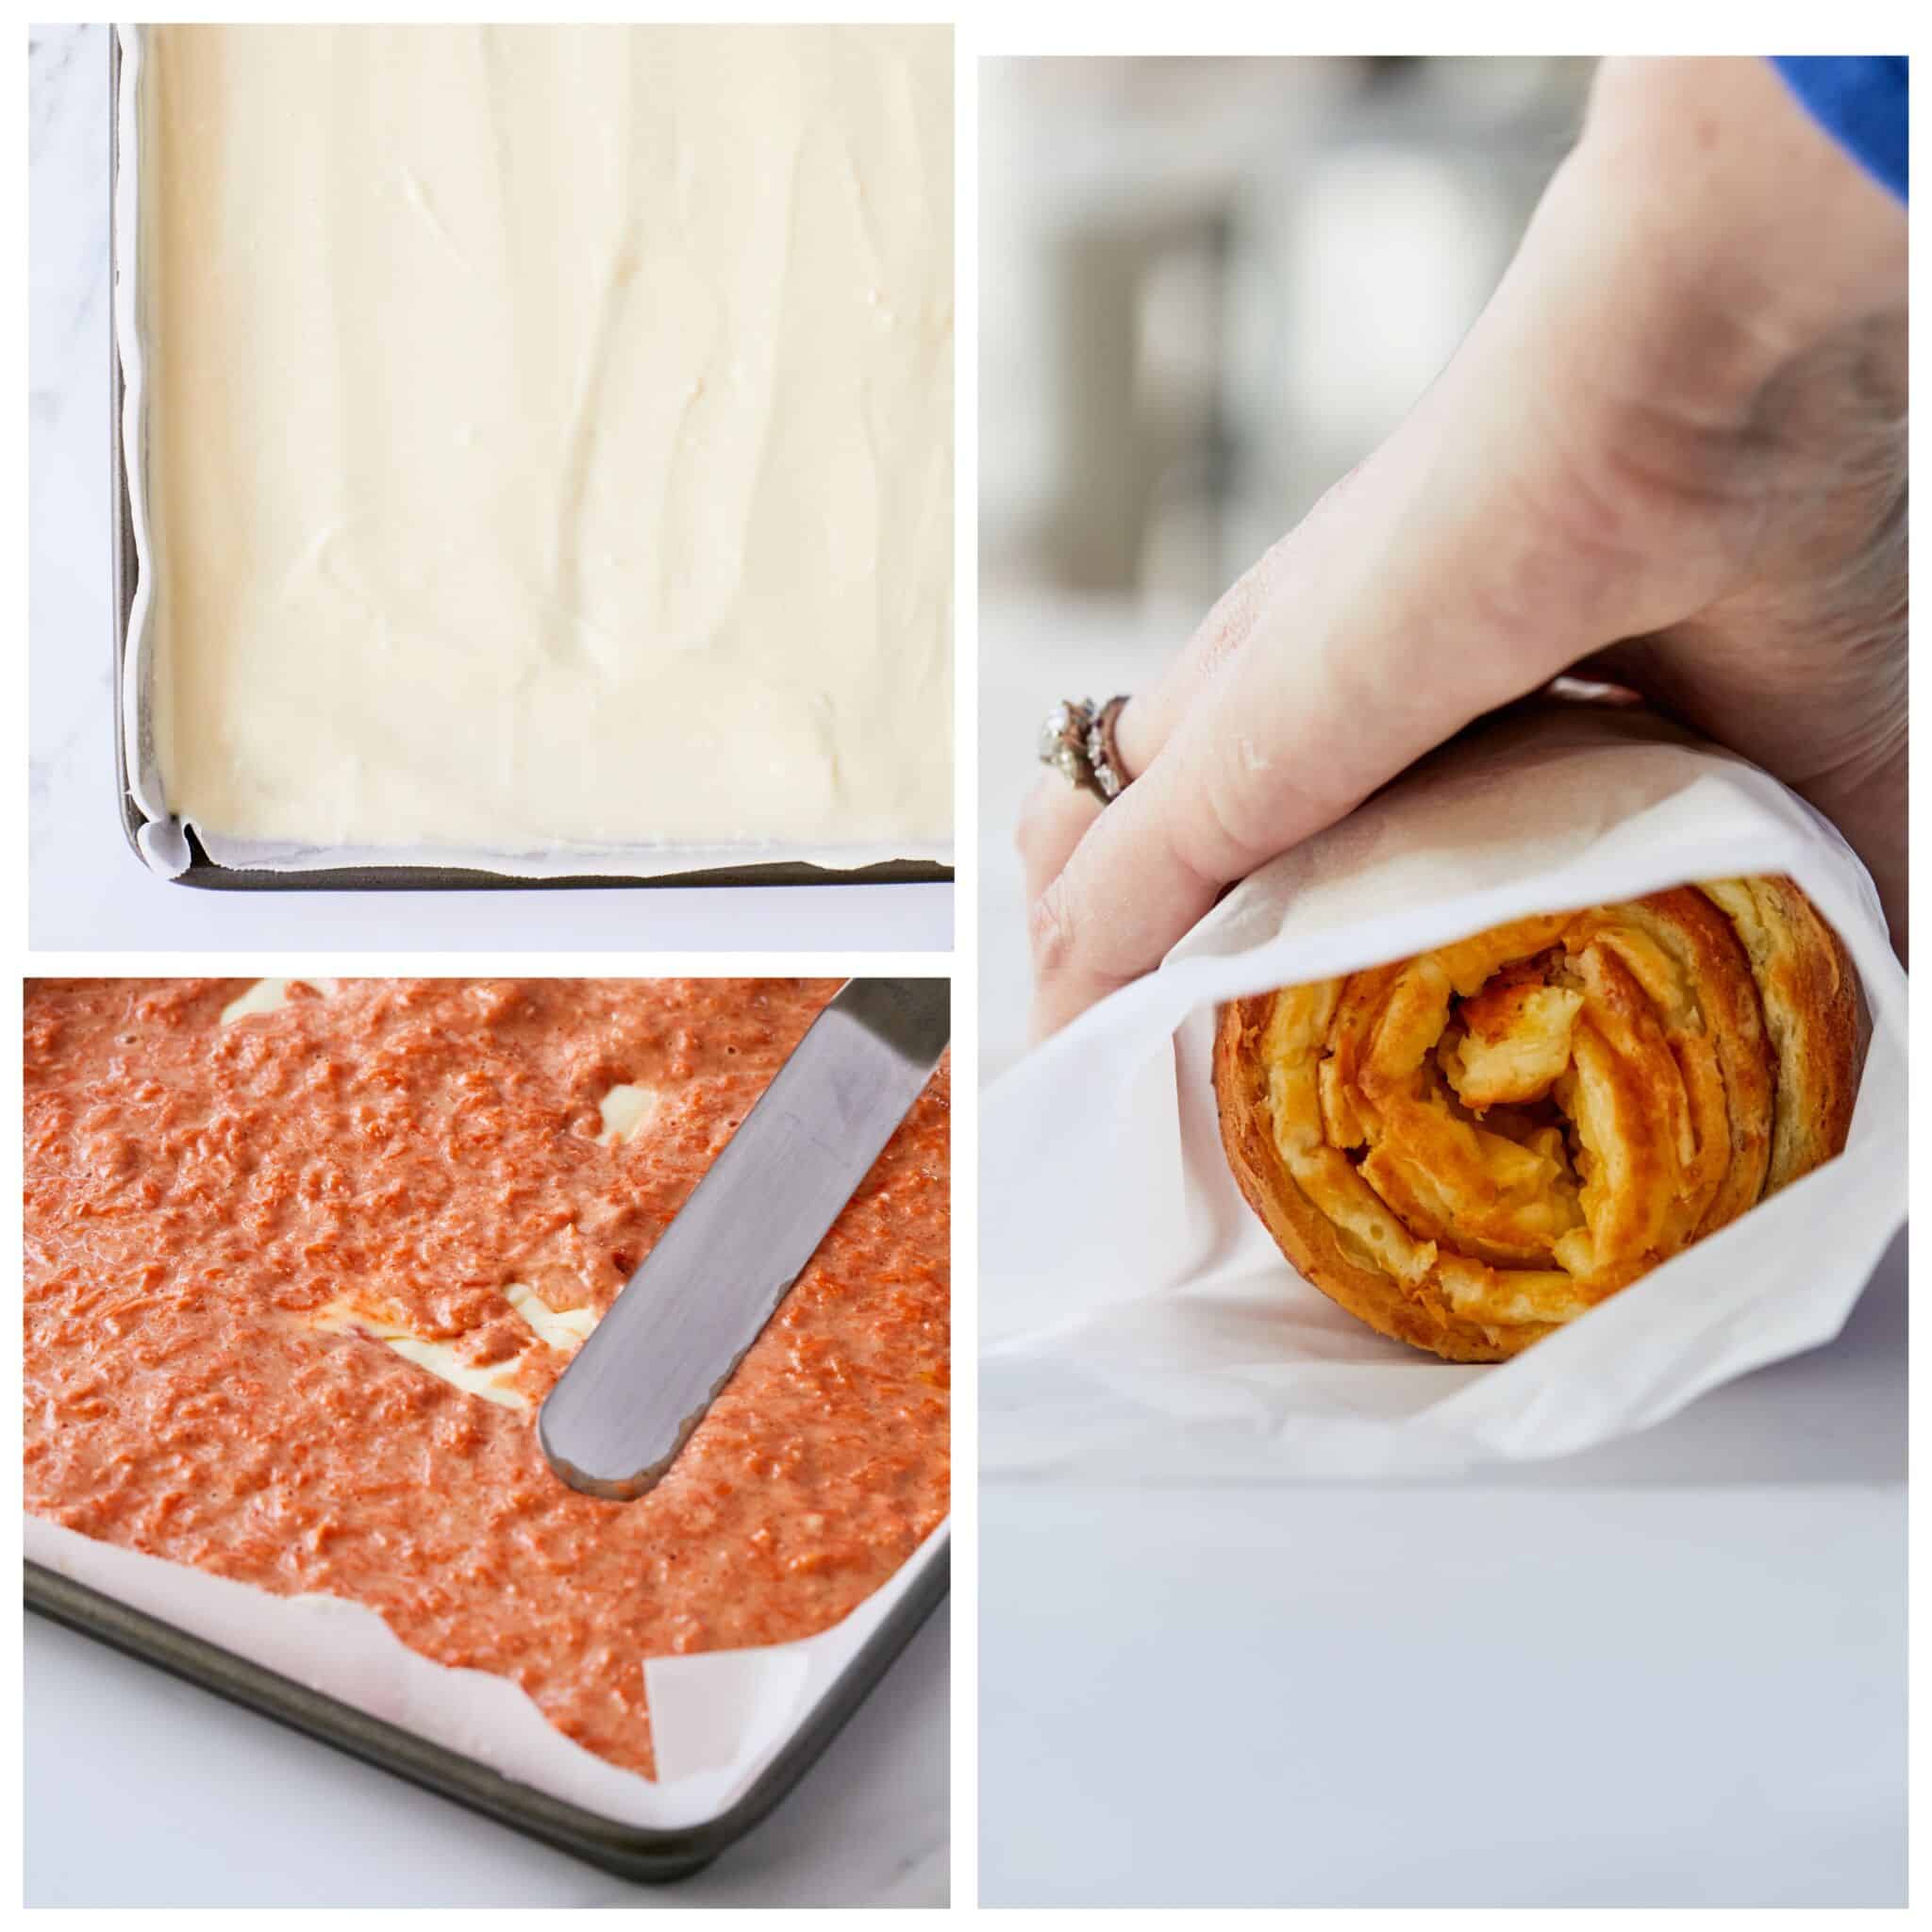 Step-by-step instructions on how to make Carrot Cake Cheesecake Roll: spread the prepared cheesecake filling in the pan then top with with Carrot cake filling and bake. Once it's done, roll up the cake when it's still warm to prevent cracking. 